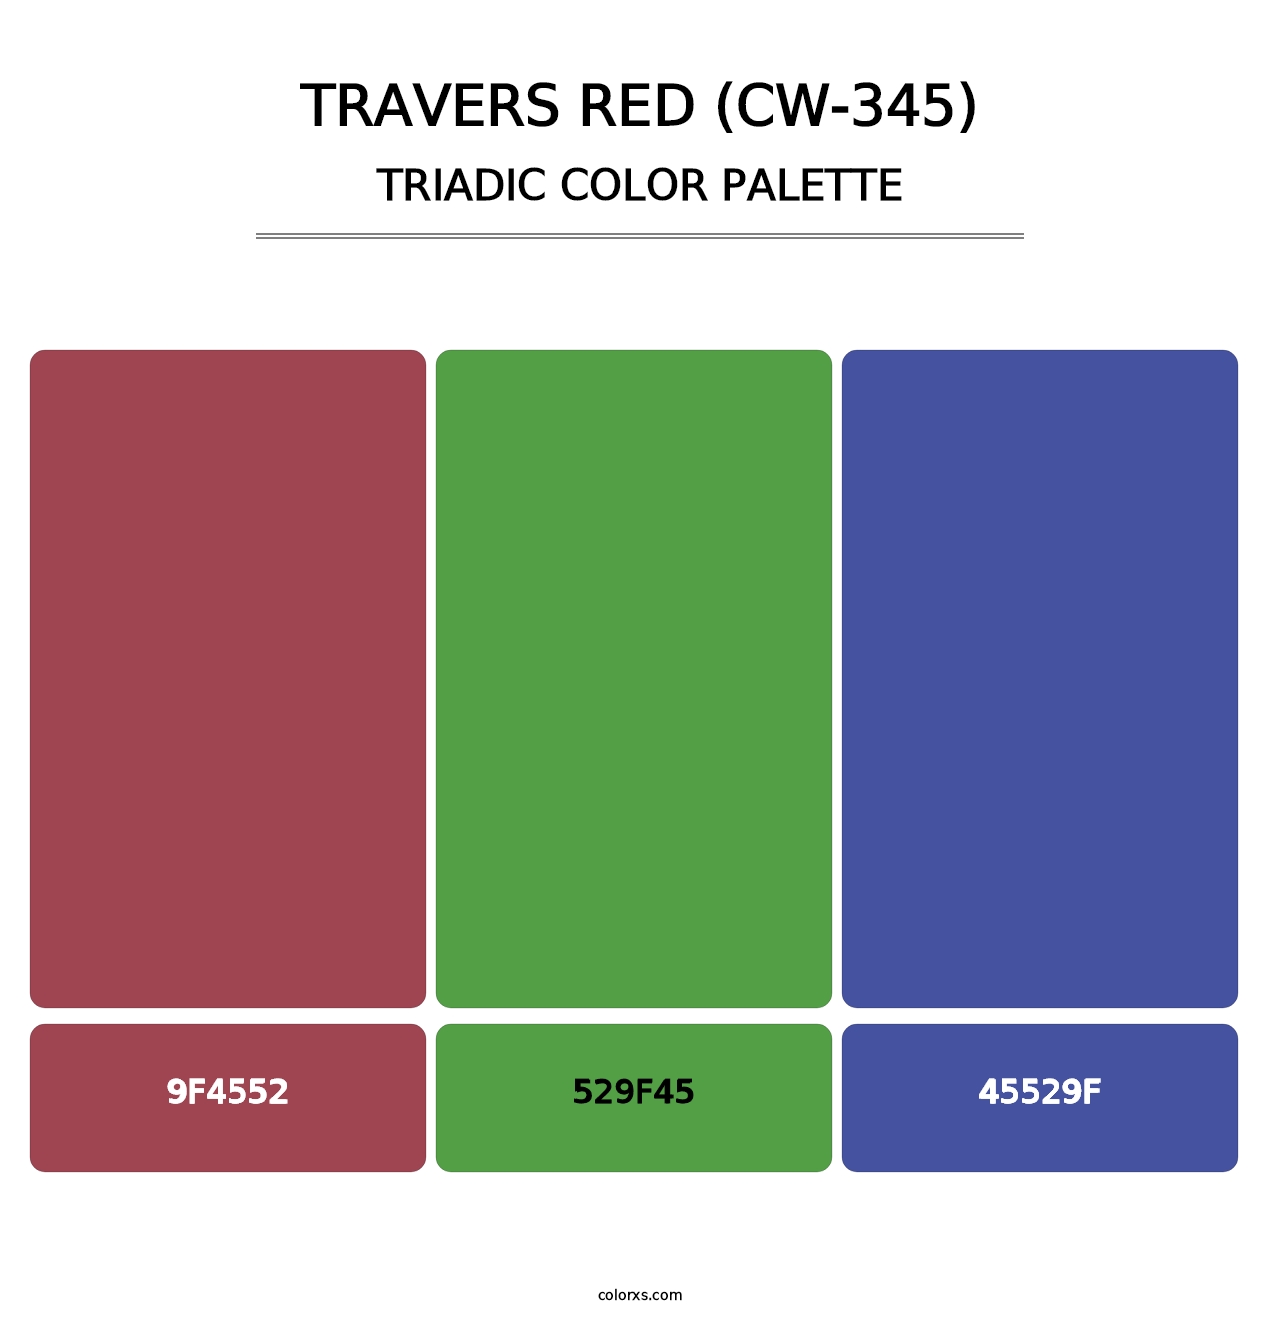 Travers Red (CW-345) - Triadic Color Palette